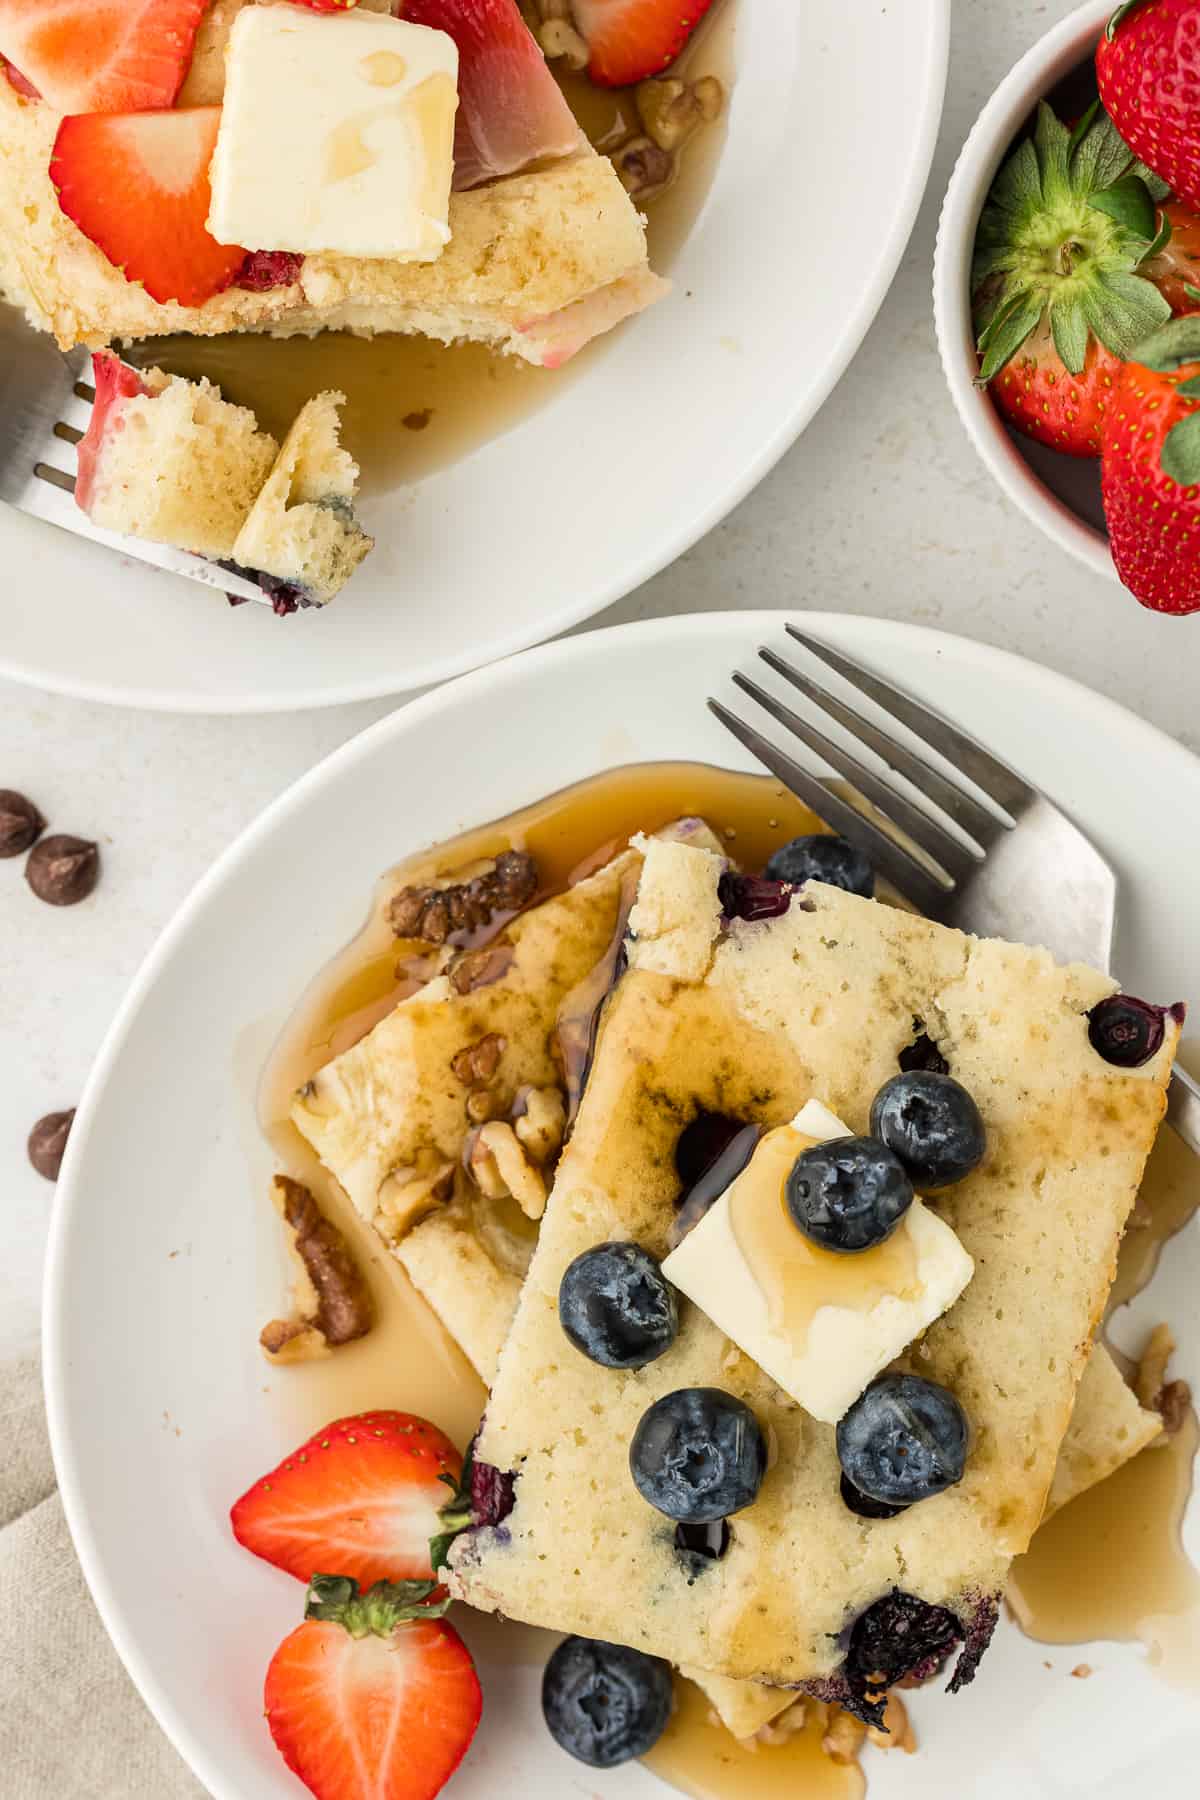 two white plates with slices of sheet pan pancakes on them, topped with slices of butter, maple syrup and fresh blueberries and strawberries, with forks on both plates and a bowl of fresh stawberries beside them